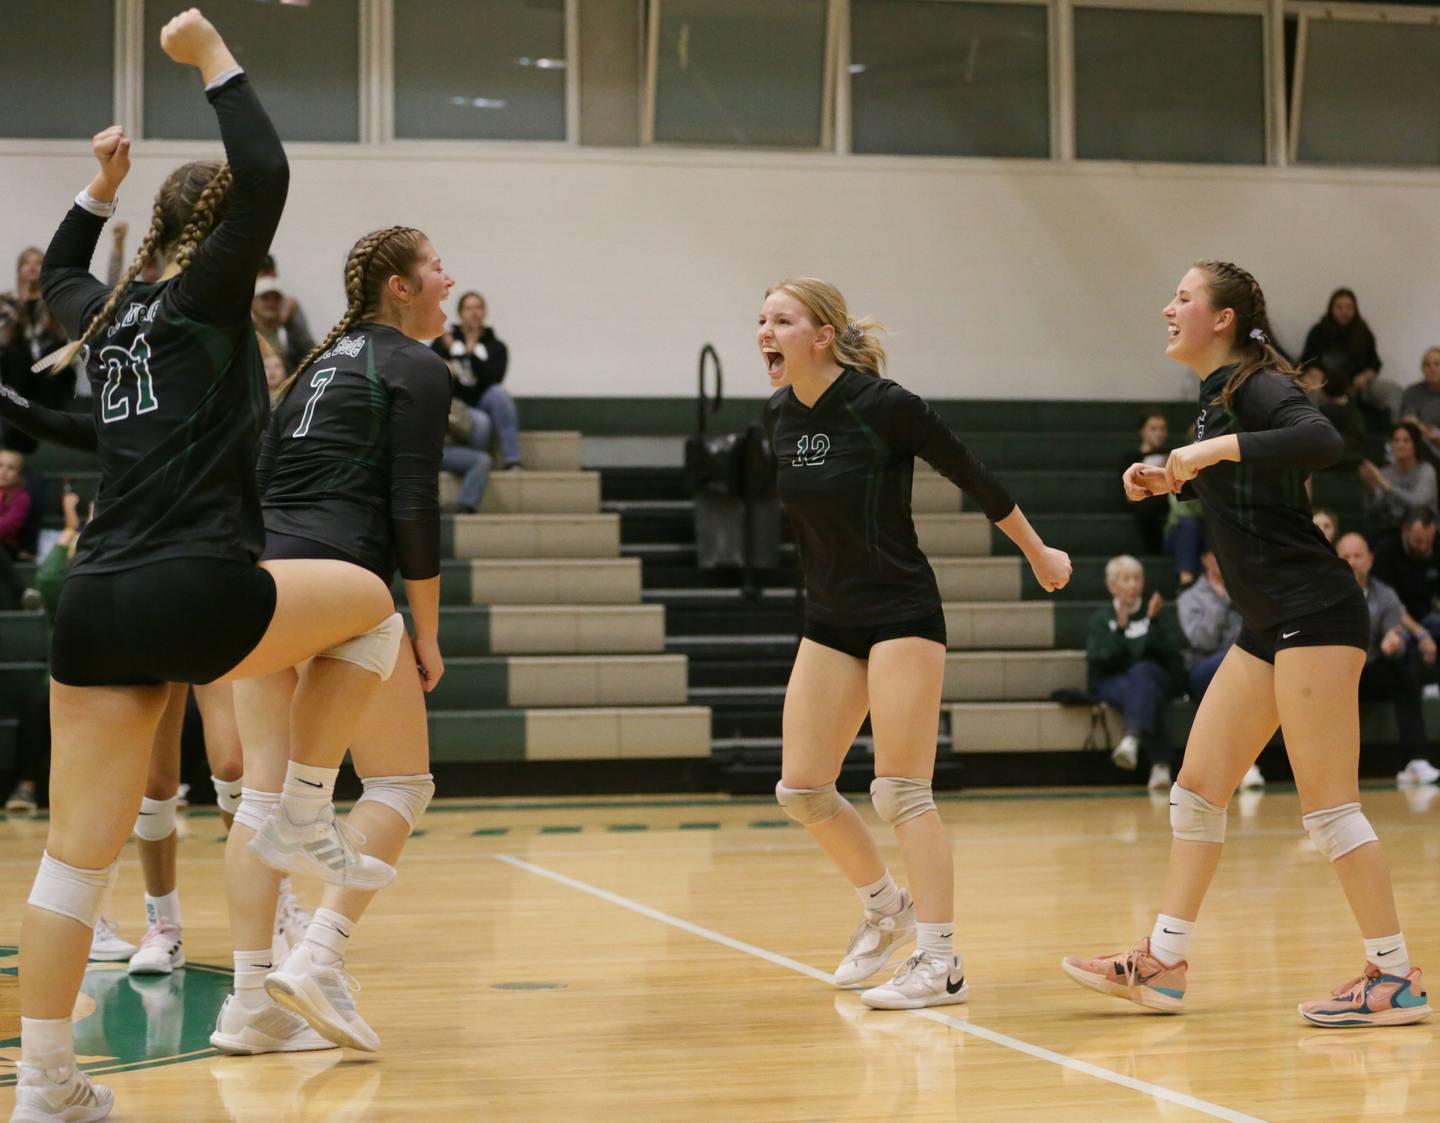 Members of the St. Bede volleyball team celebrate after defeating Henry-Senachwine in the Class 1A semifinal game on Wednesday, Oct. 16, 2022 at St. Bede Academy in Peru.